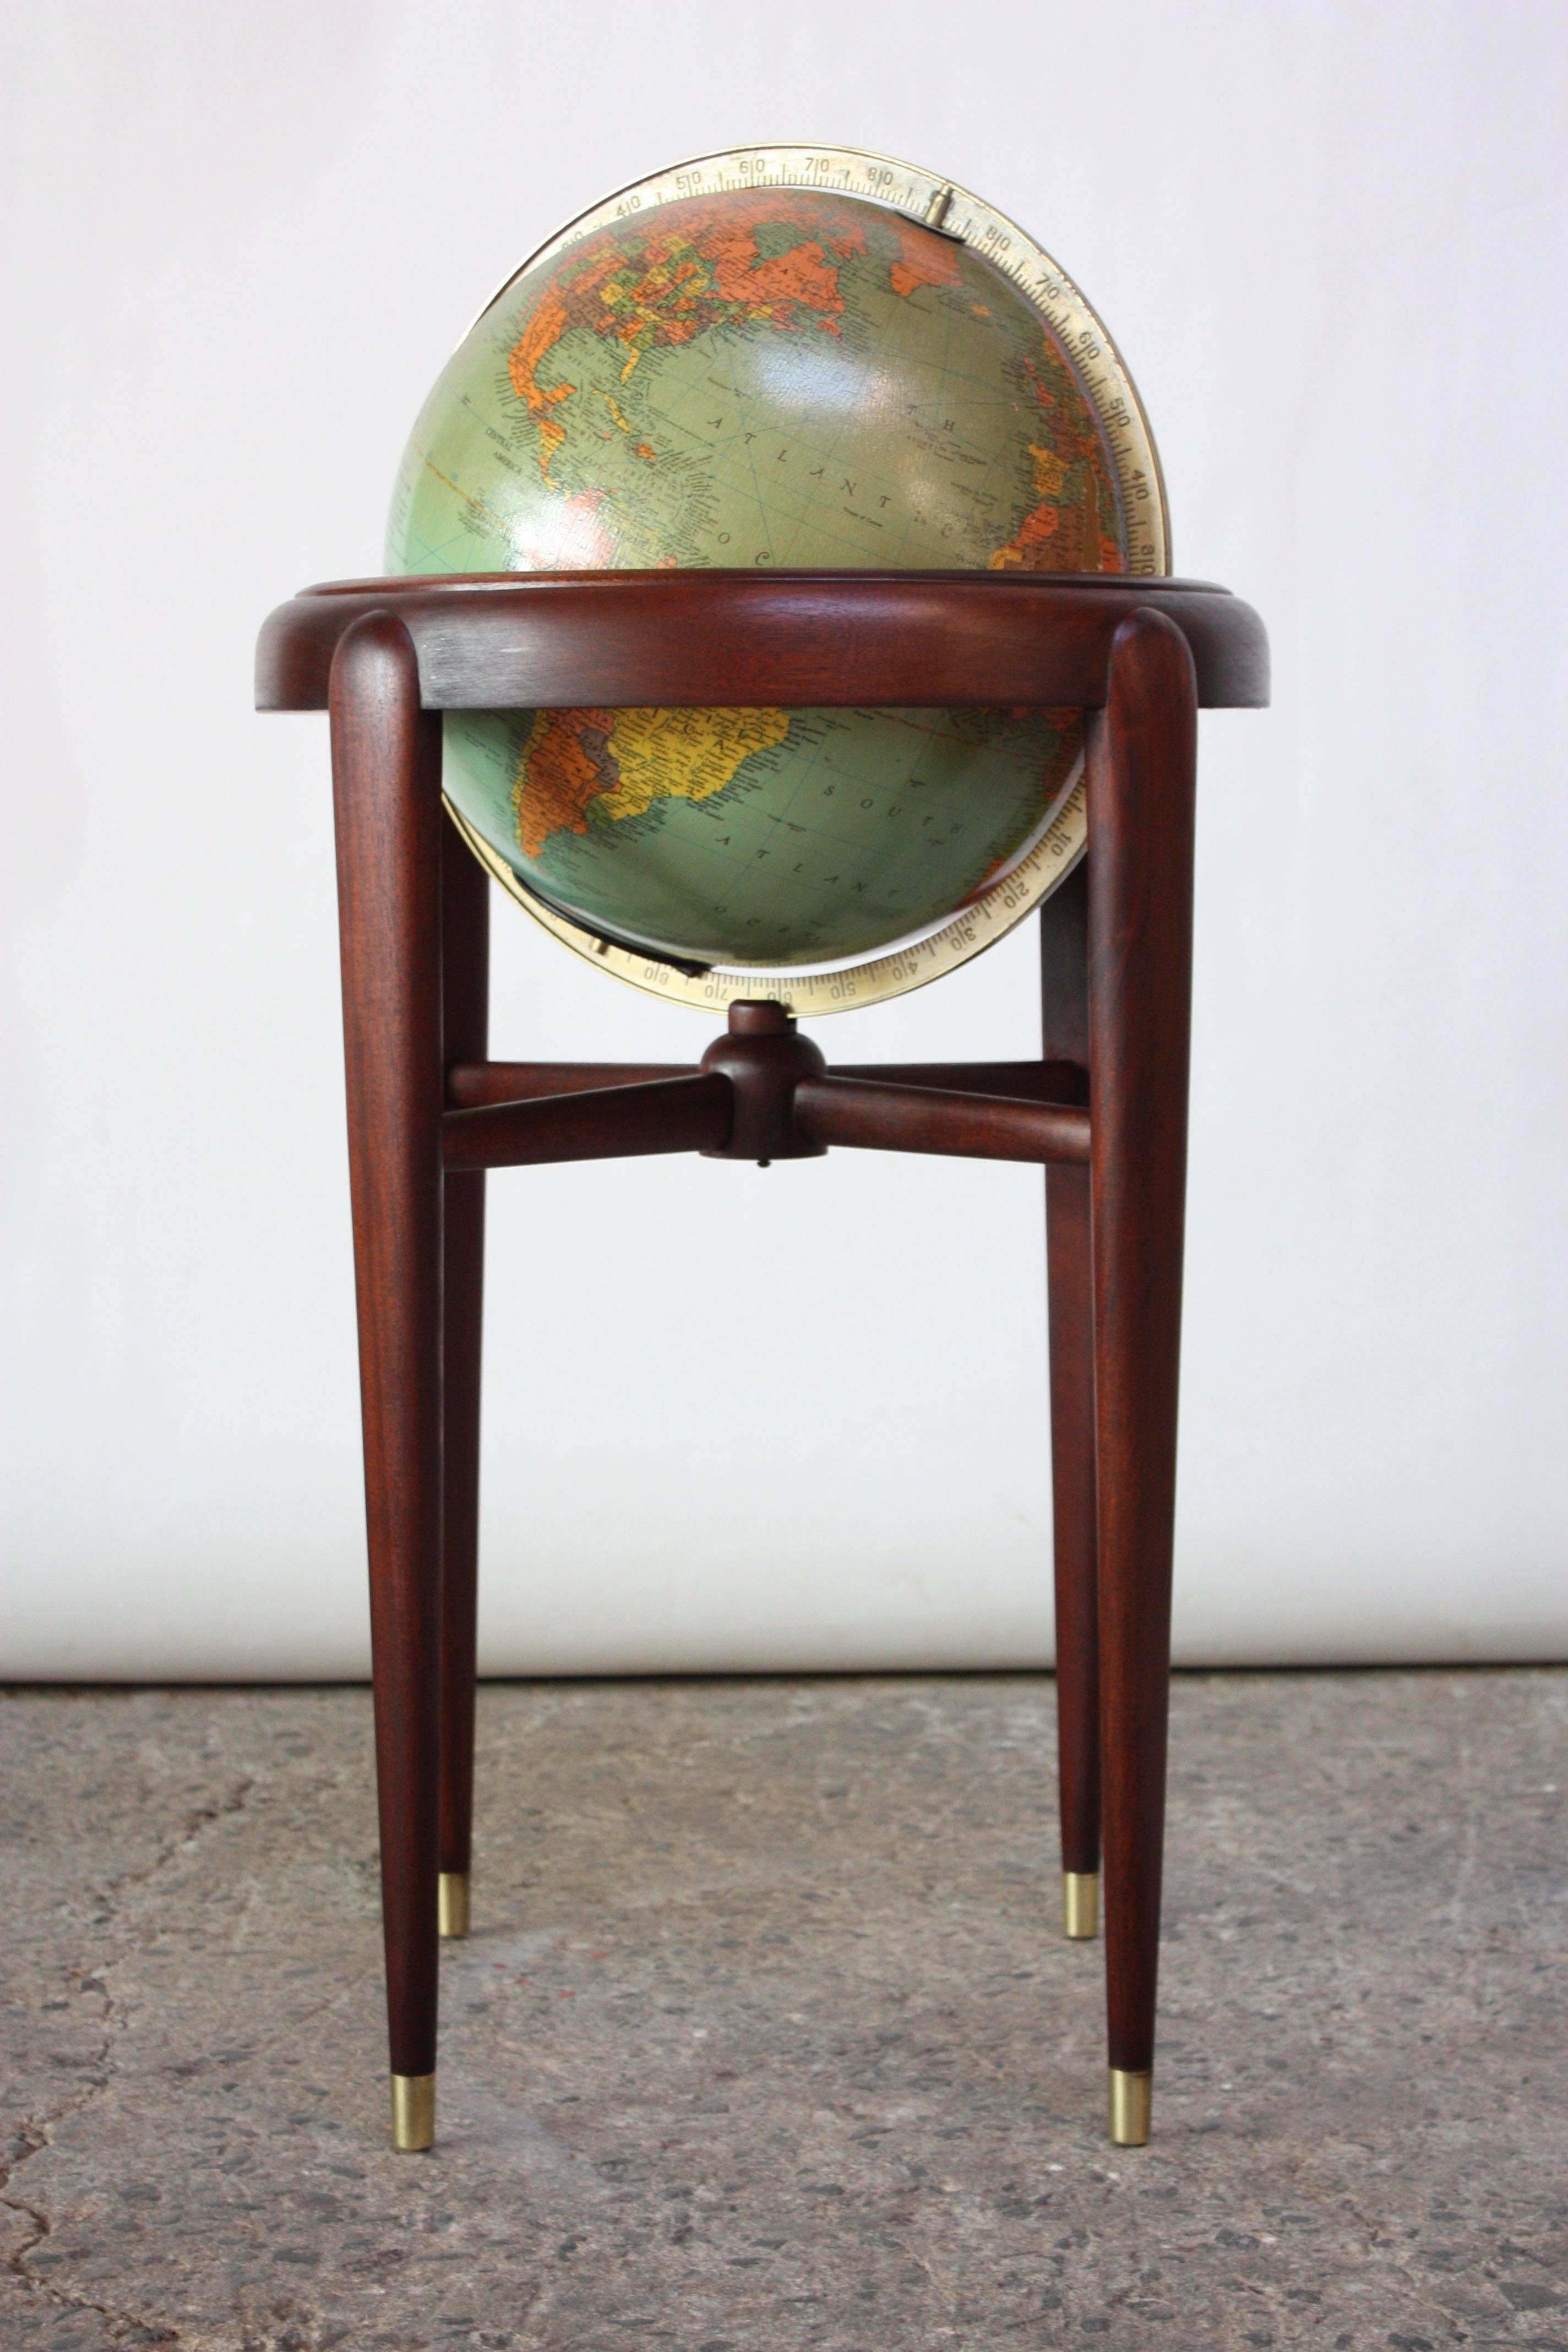 1960s Replogle (Chicago, IL) globe on stand composed of paper gores over glass with a cast metal meridian. Base is mahogany with brass feet and features a full 360 degree swivel action. Wear / spots of loss to the globe itself, as pictured; base is